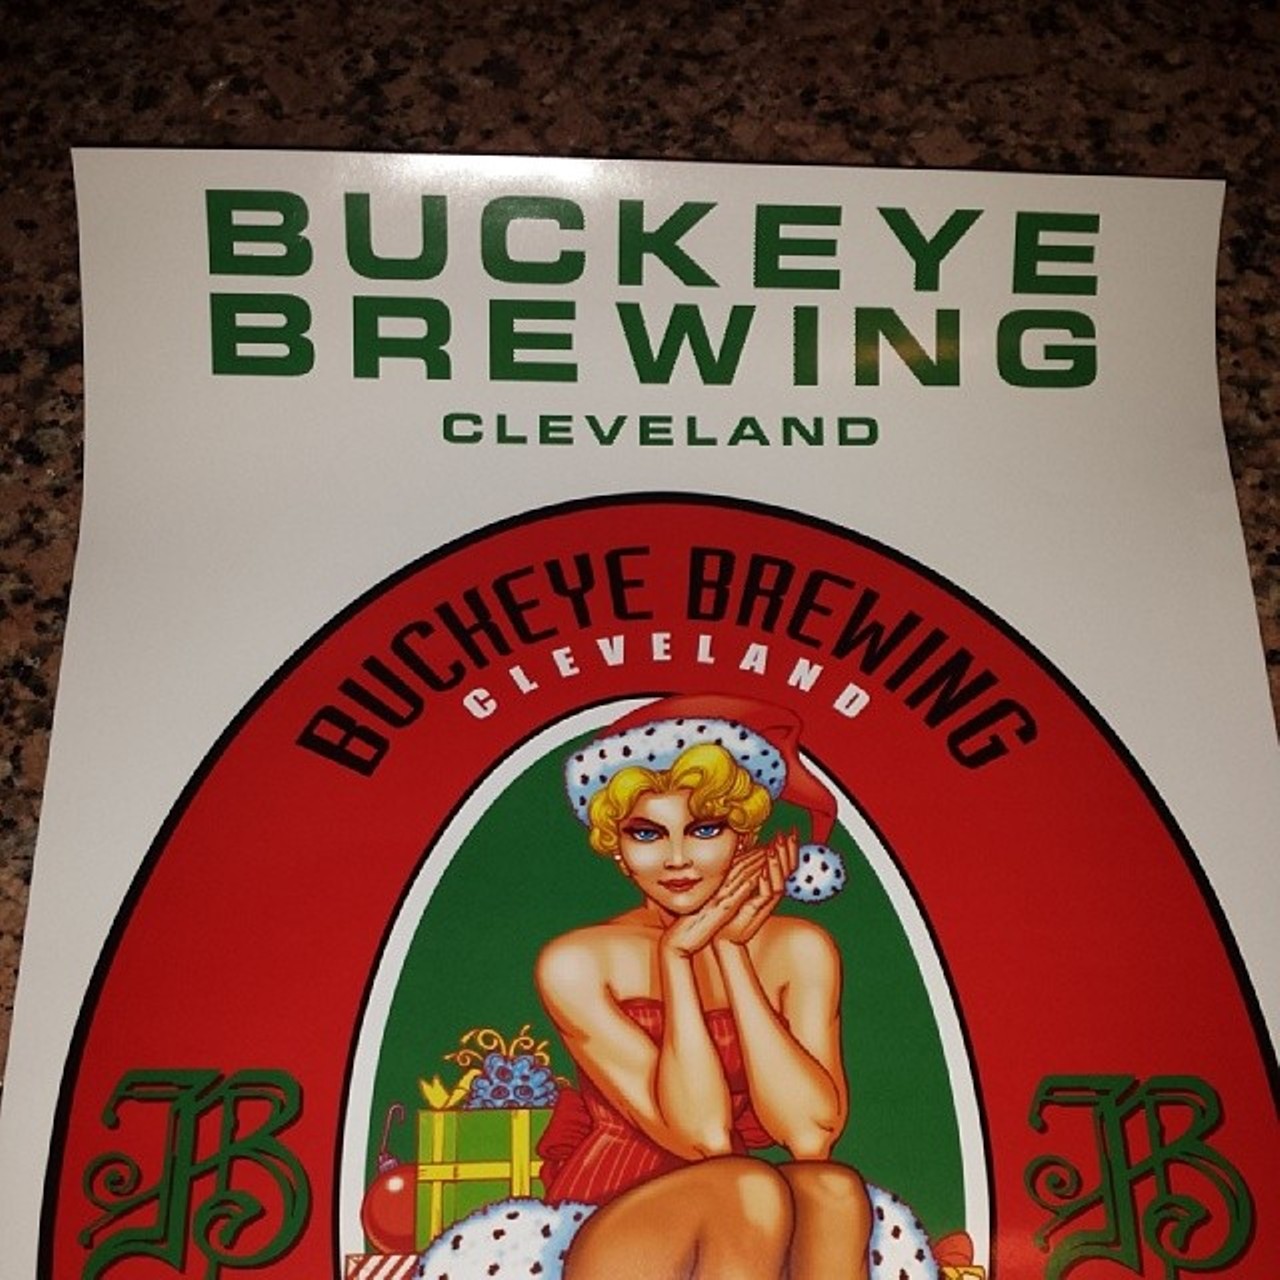 Buckeye offers up Christmas Girl, which clocks in with a lower ABV than most Christmas offerings but with all the taste. "Flavorful, easy drinking, delicate beer brewed with quality French & Belgian base malt and complex Belgian yeast," they say and we have to agree though we don't know necessarily know much about yeast.